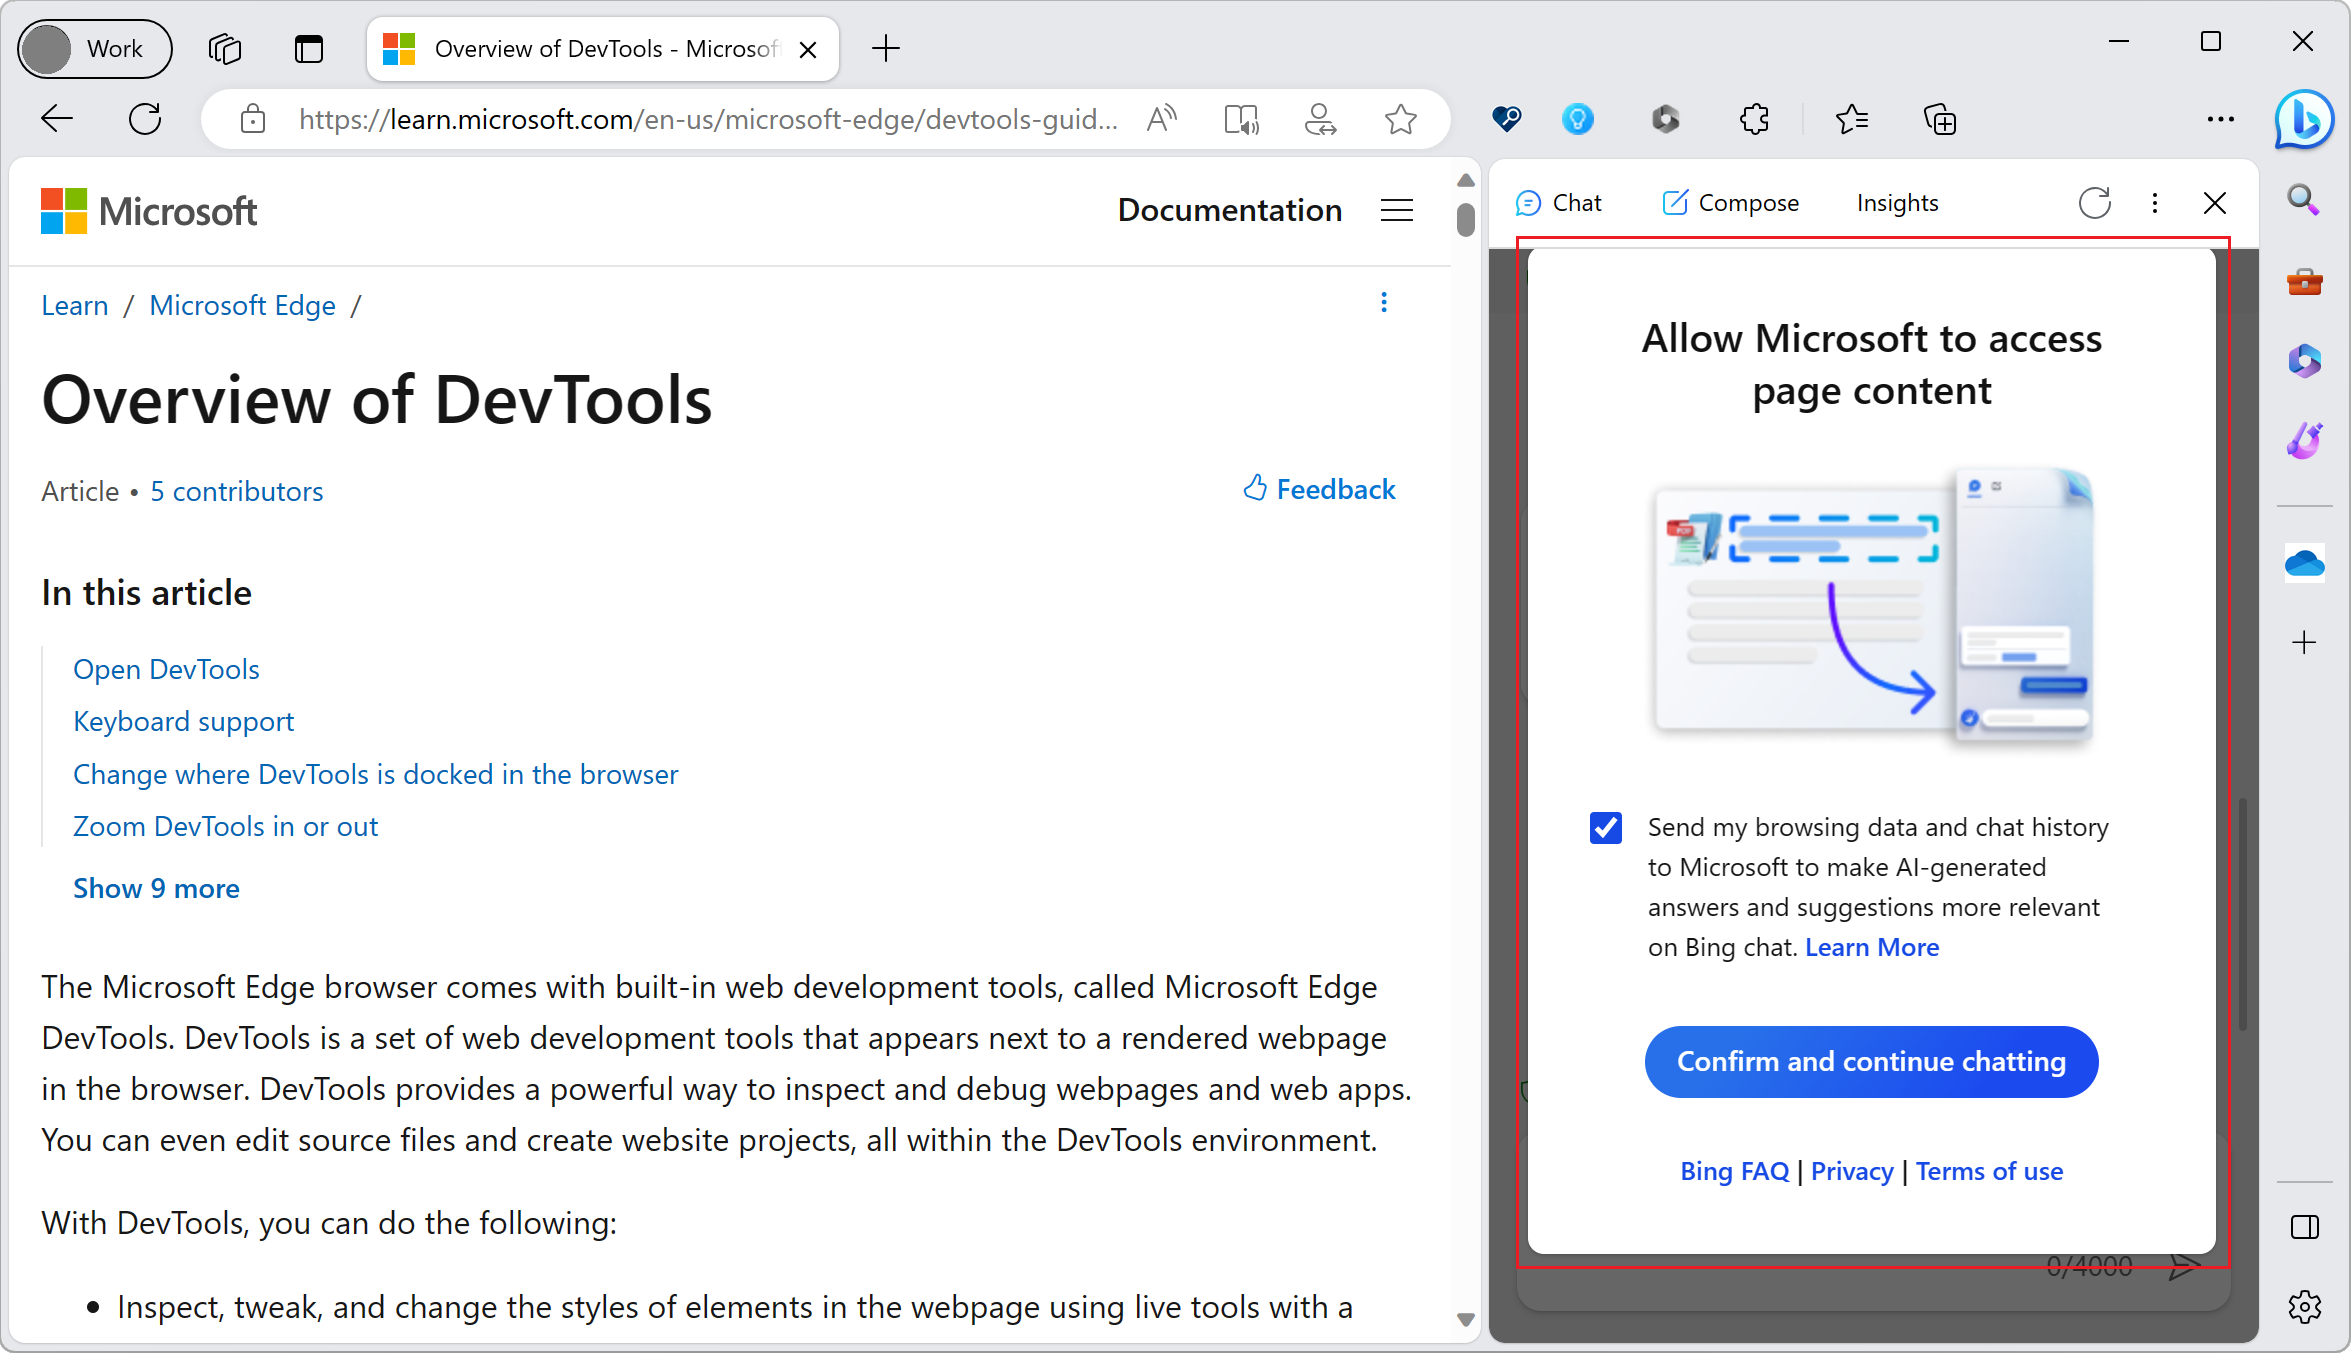 Copilot asking for consent to access the page content in Microsoft Edge